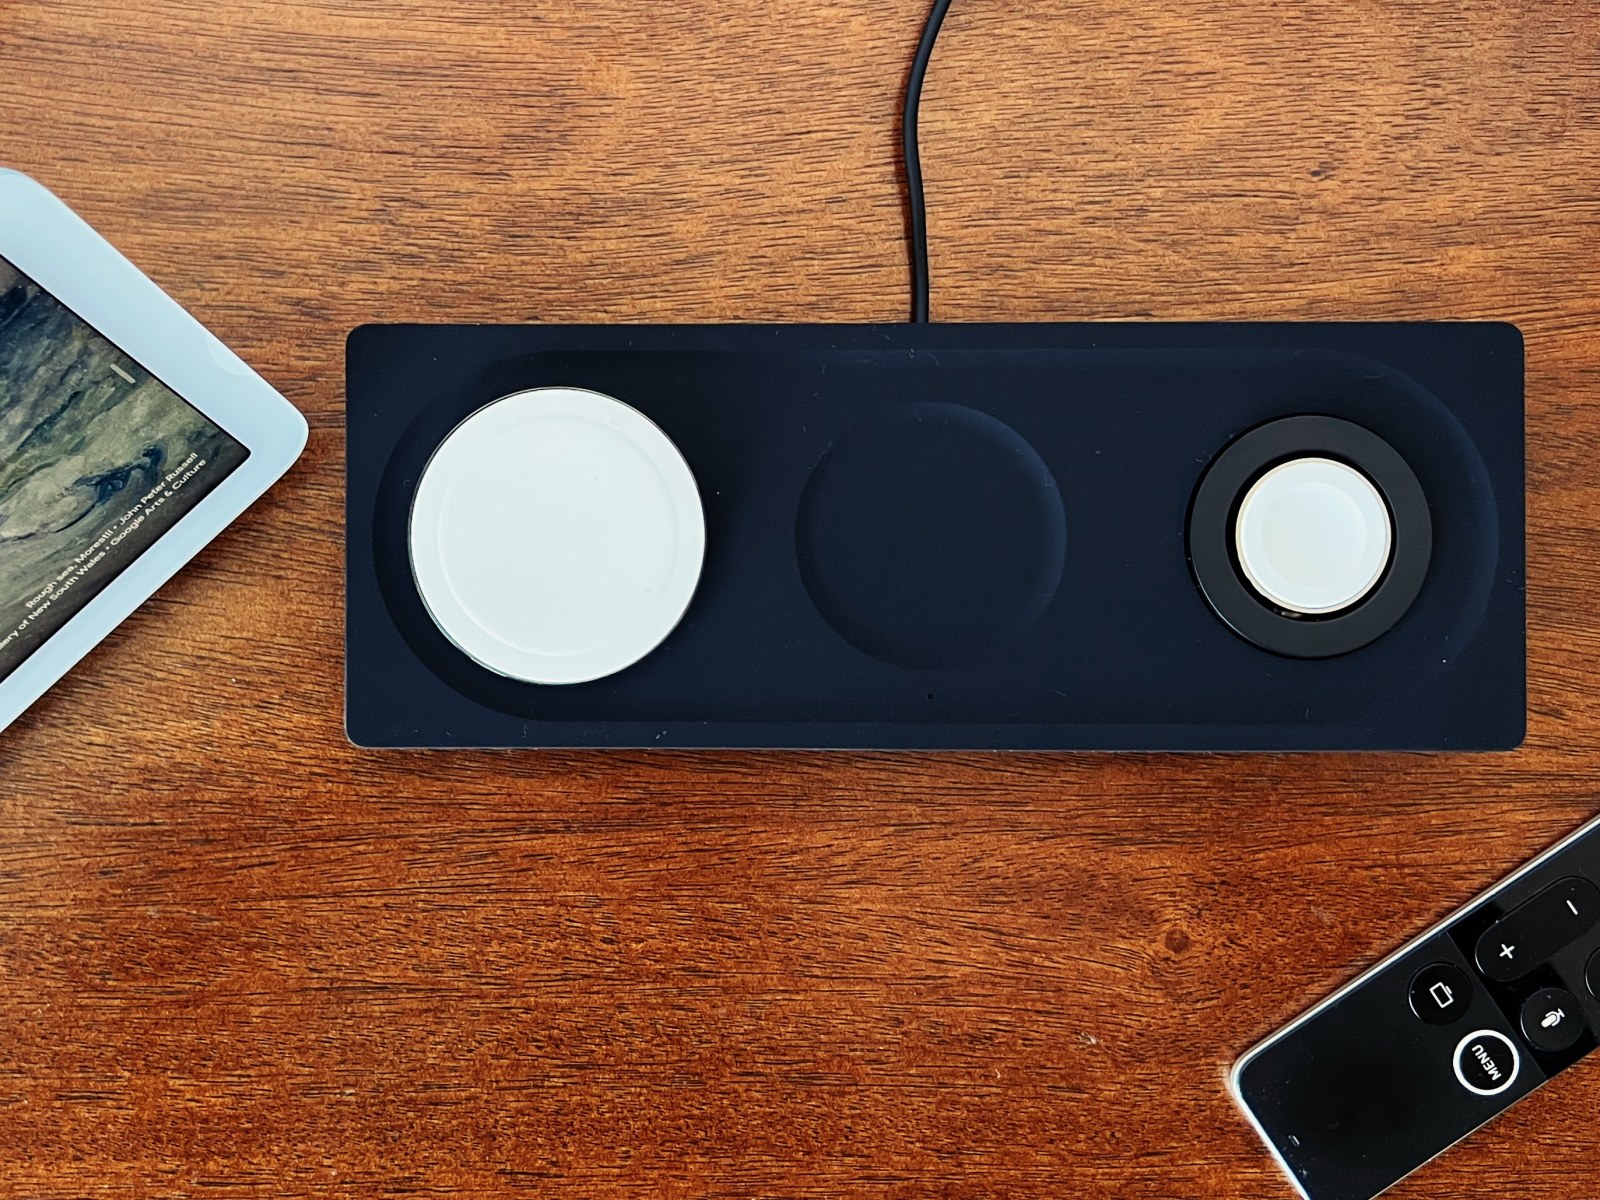 First Look: Belkin 3-in-1 Wireless Charging Pad With MagSafe